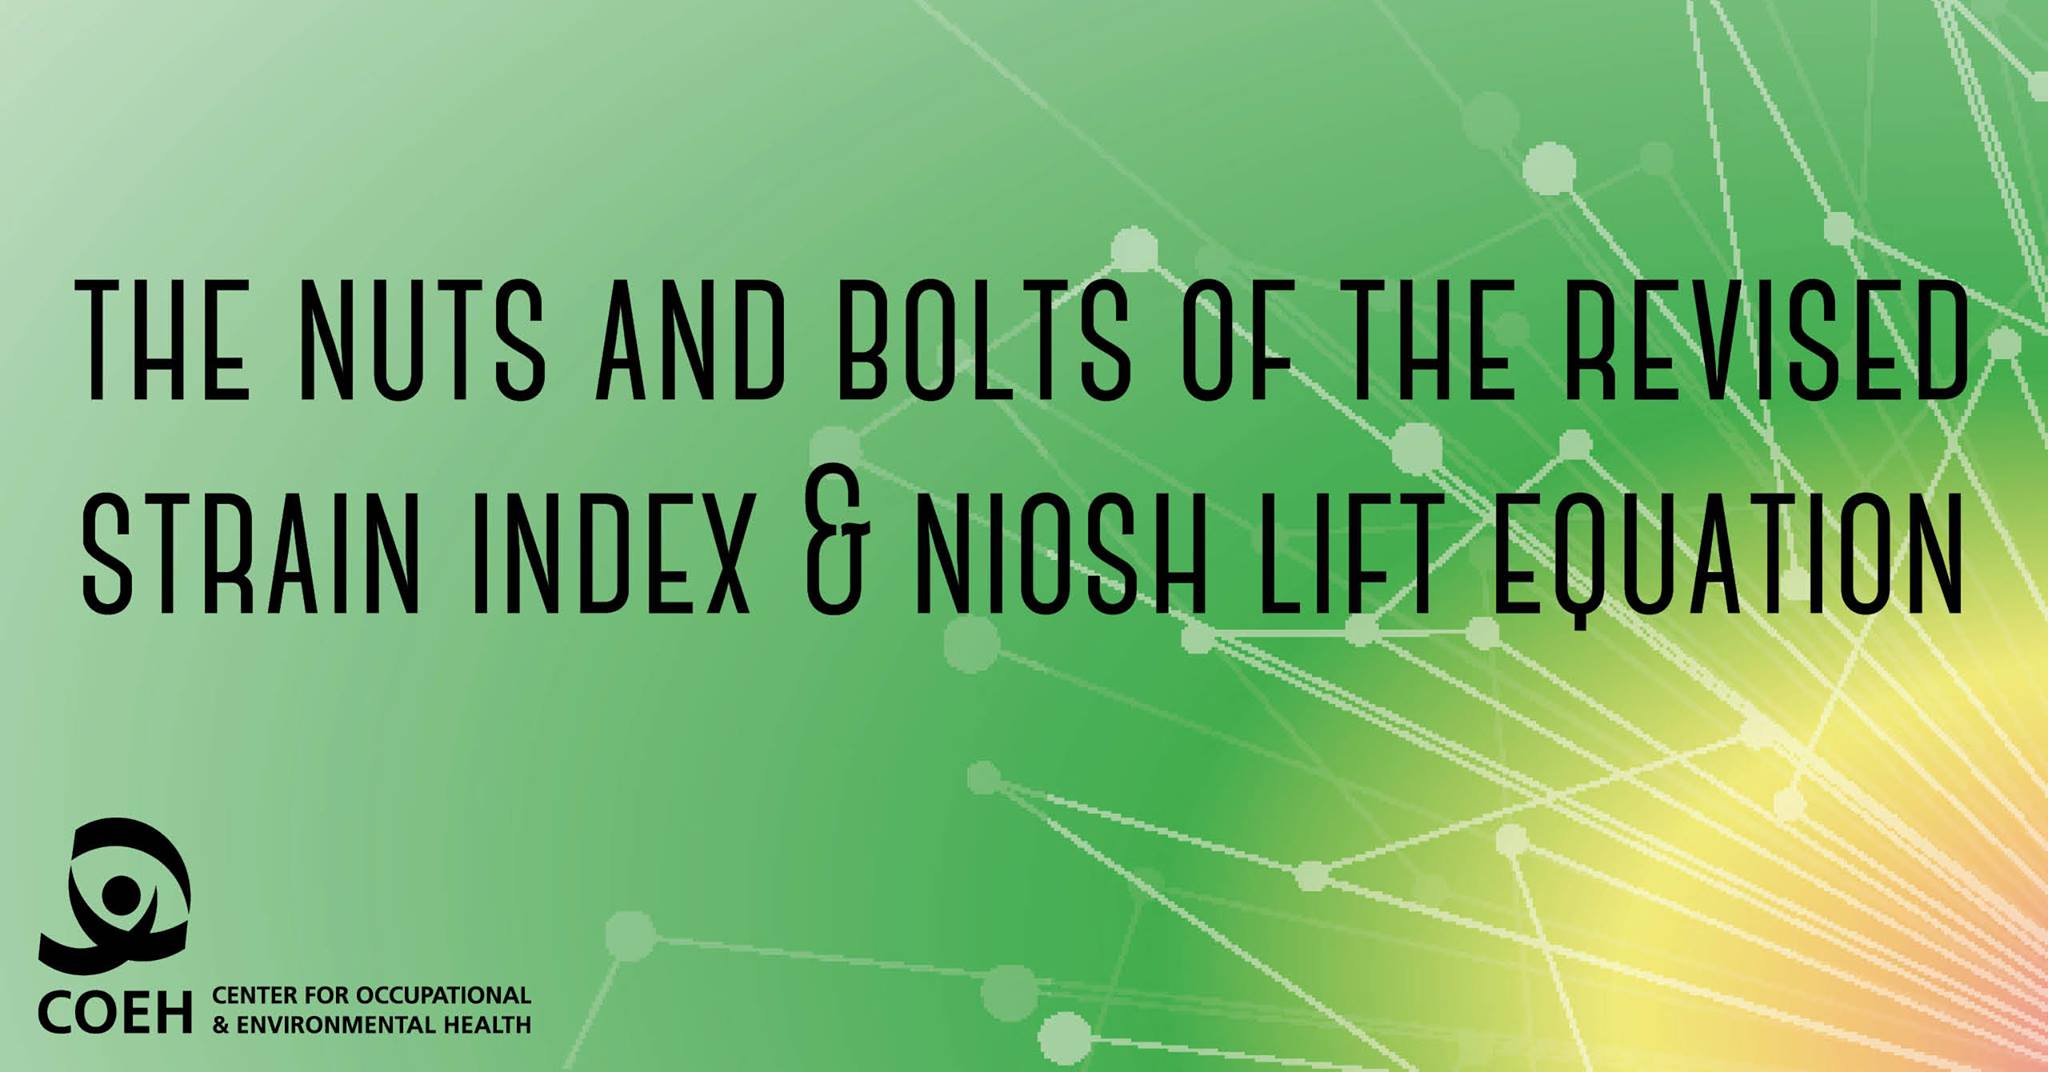 The Nuts and Bolts of the Revised Strain Index & NIOSH Lift Equation